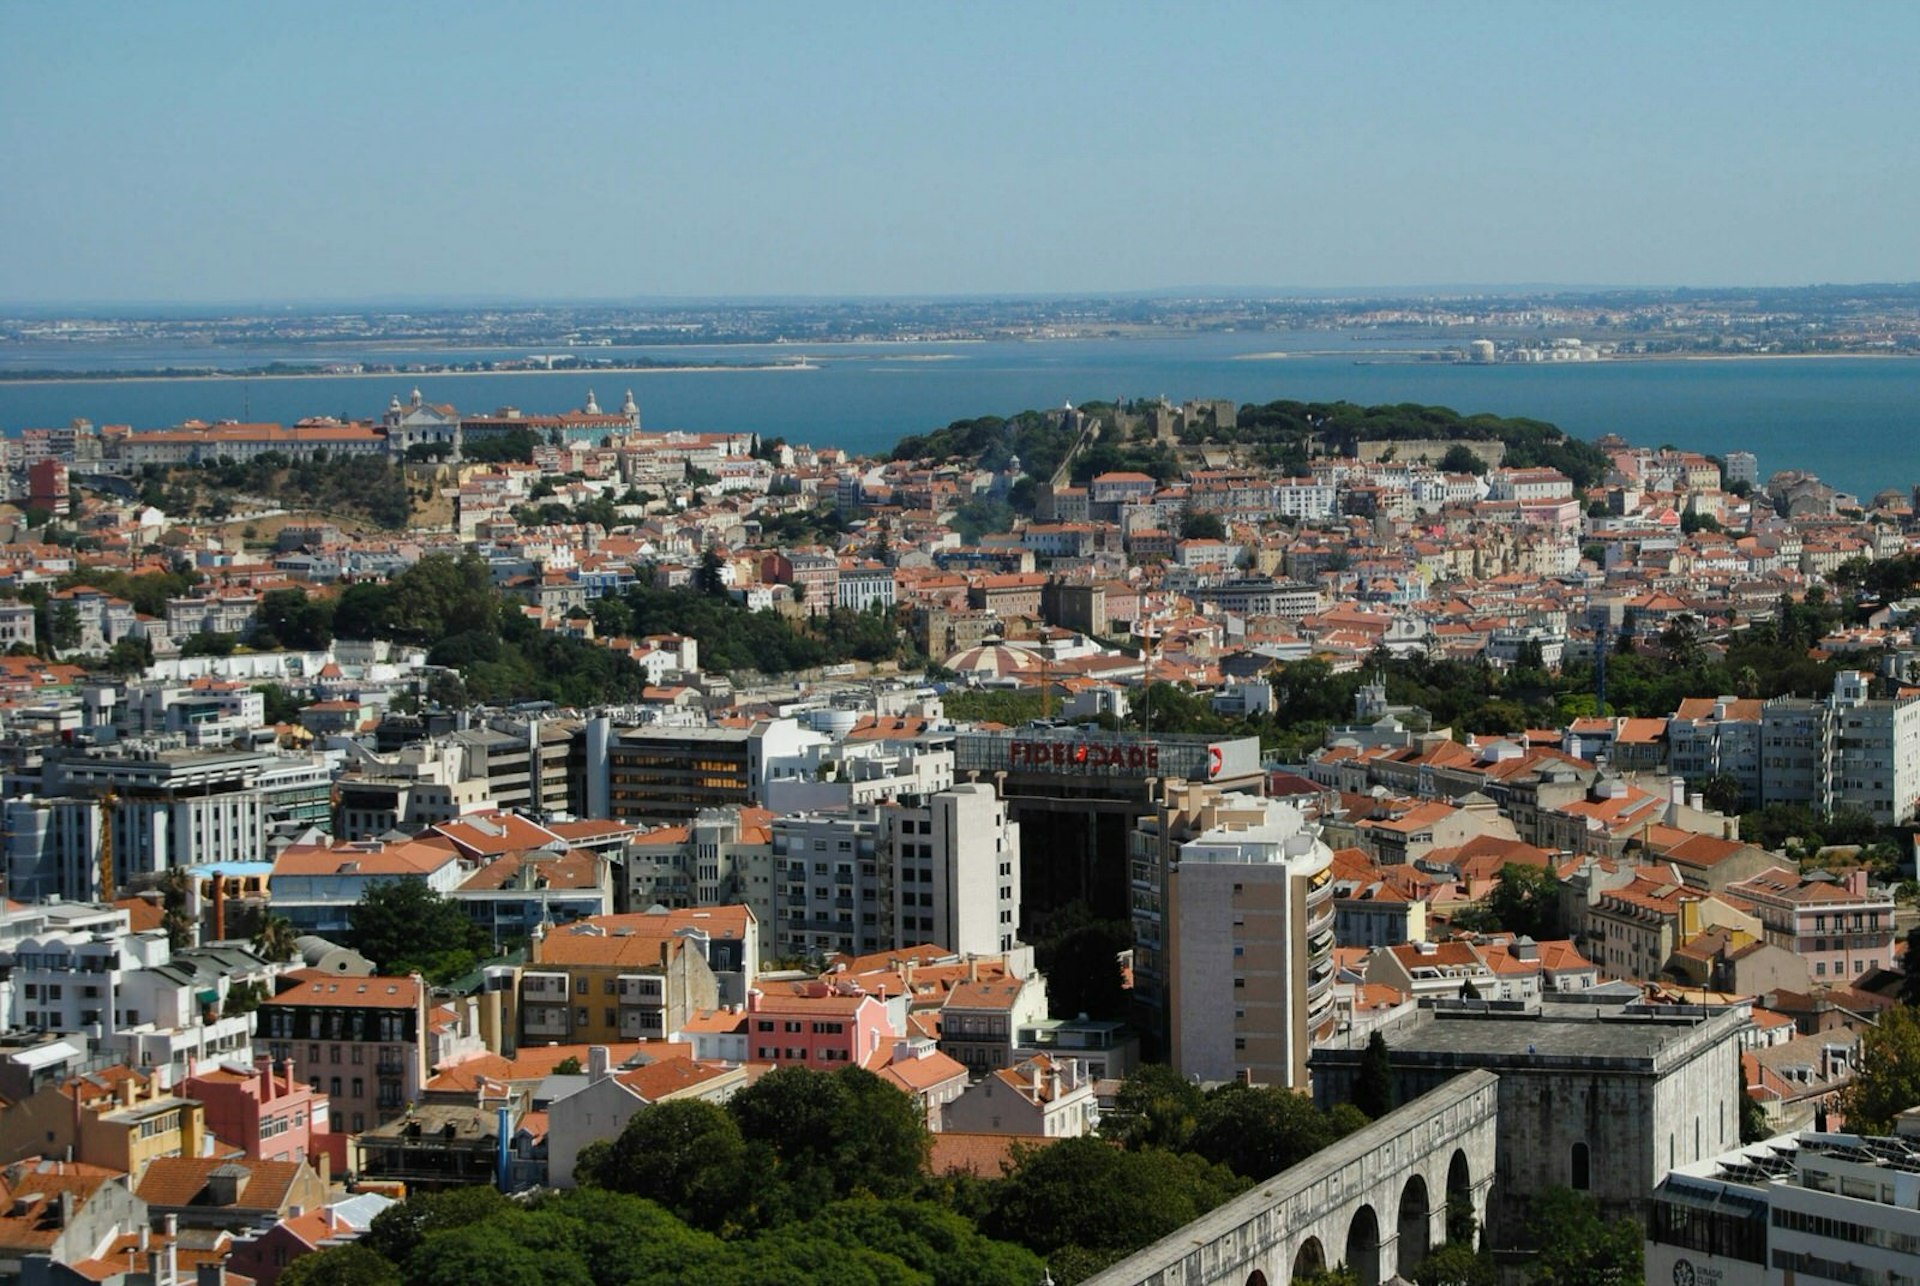 Looking out over Lisbon and the river from the top of Amoreiras Shopping Mall